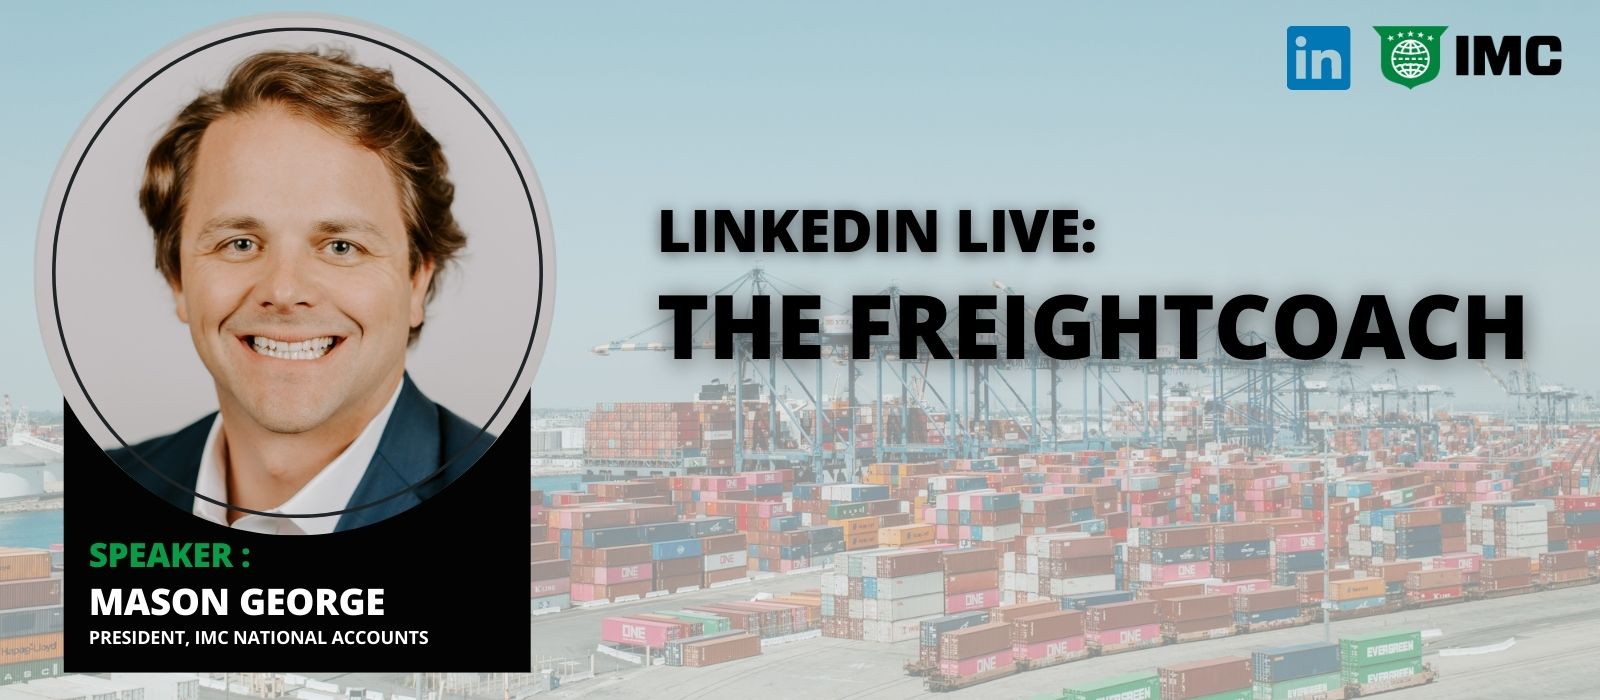 Mason George Featured on The FreightCoach LinkedIn